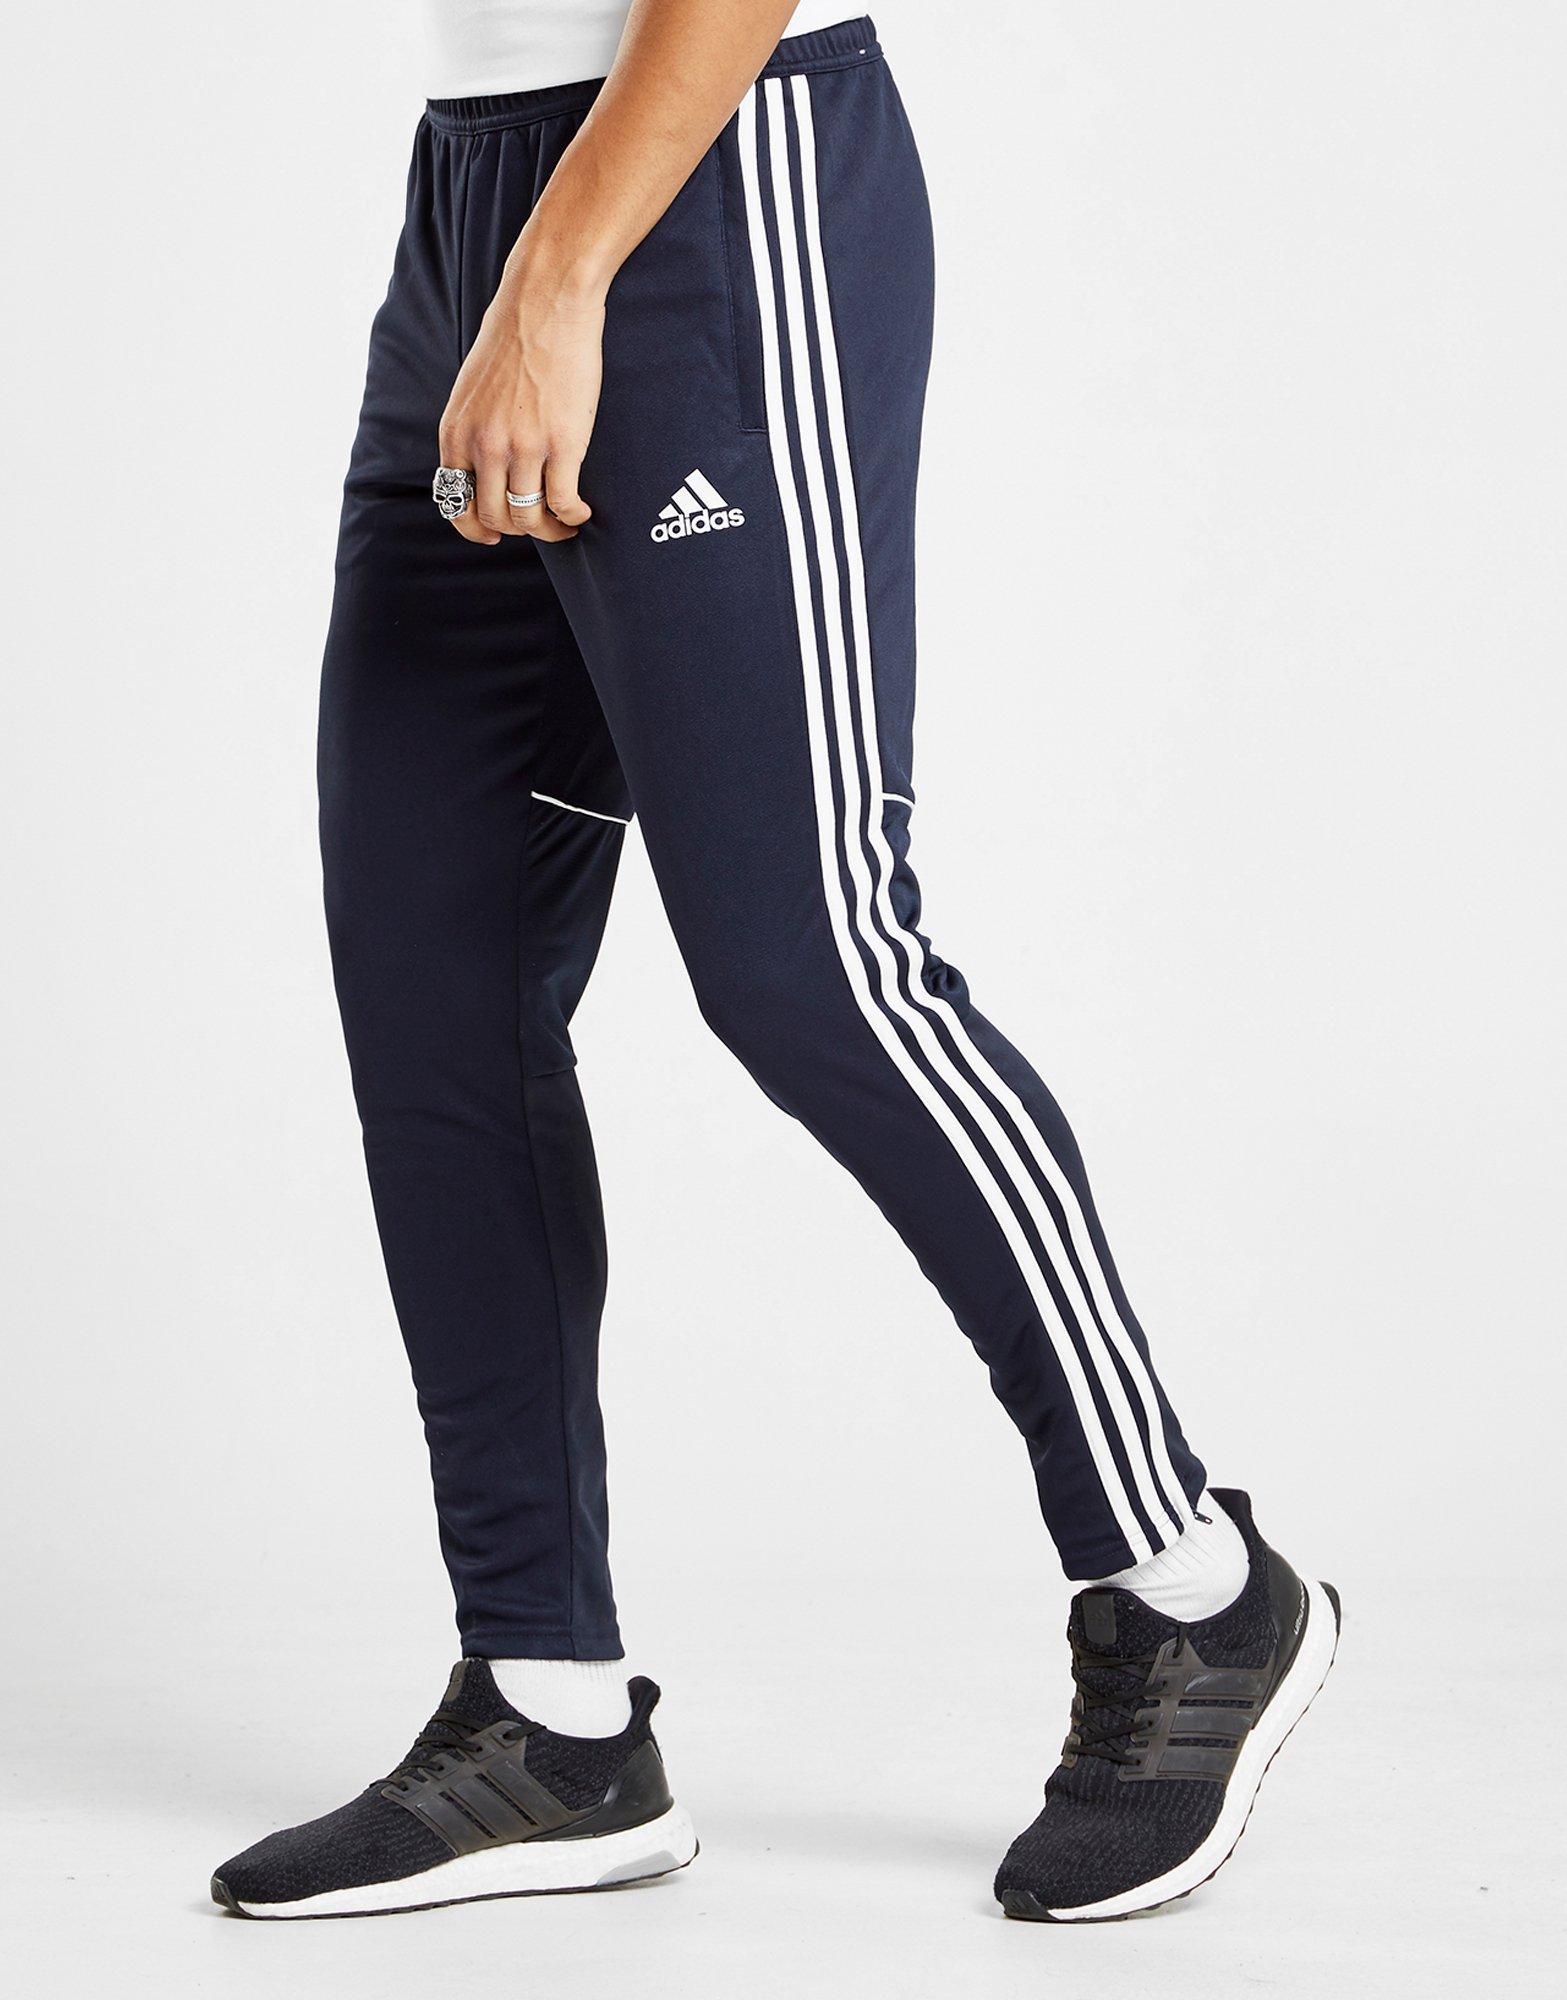 Details 86+ adidas synthetic track pants - in.eteachers